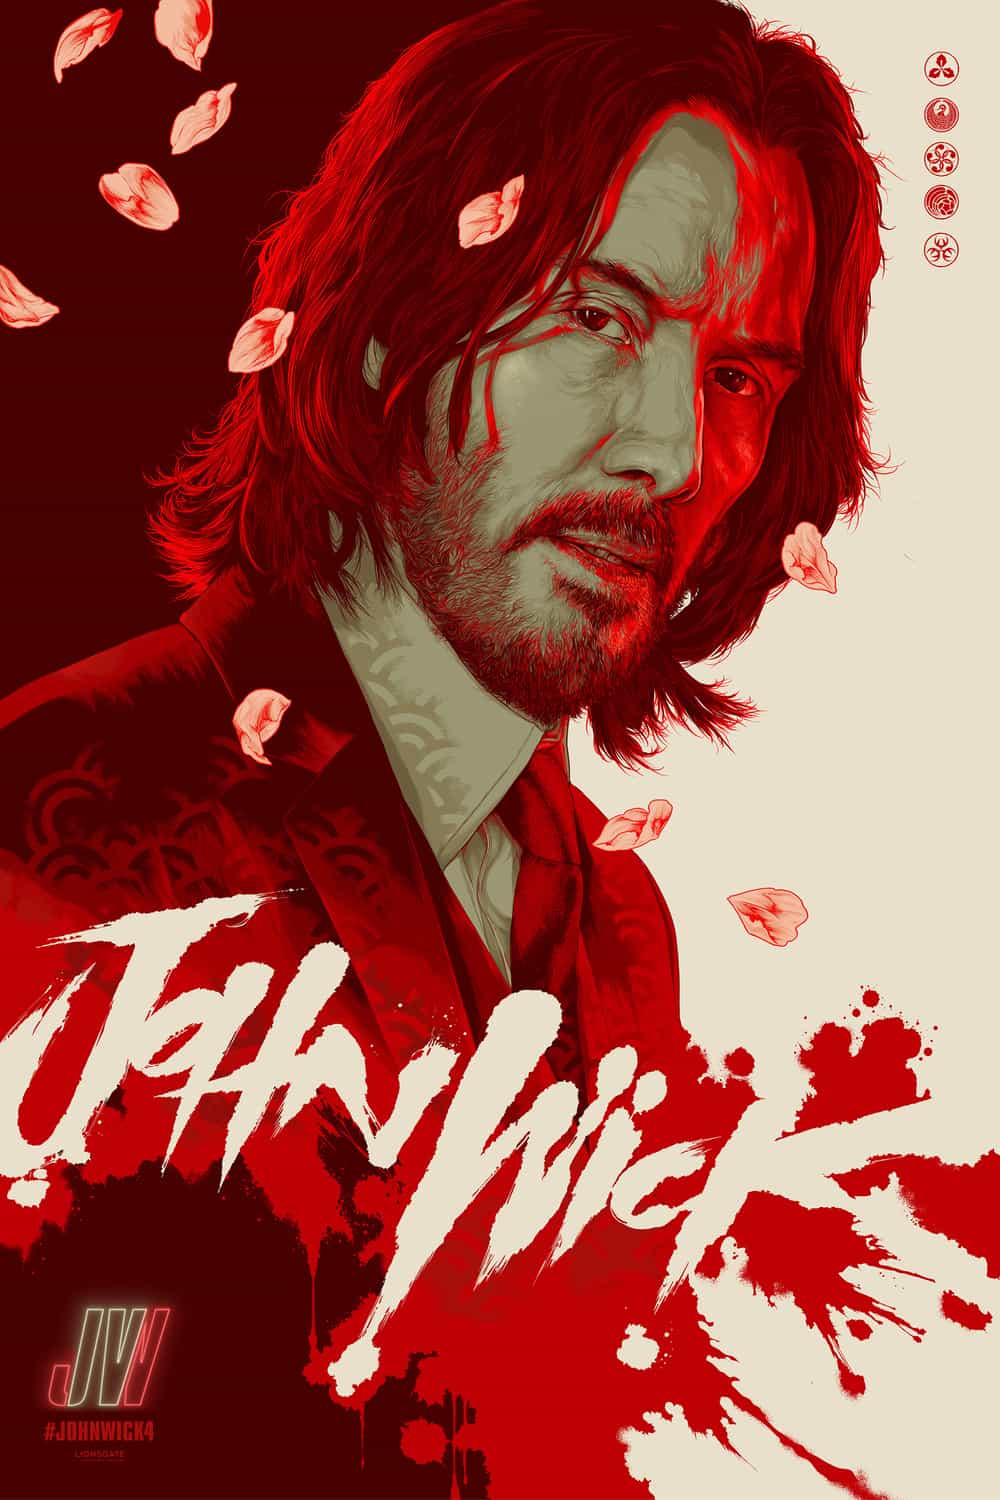 Check out the new trailer for upcoming movie John Wick Chapter 4 which stars Keanu Reeves and Donnie Yen - movie UK release date 24th March 2023 #johnwickchapter4